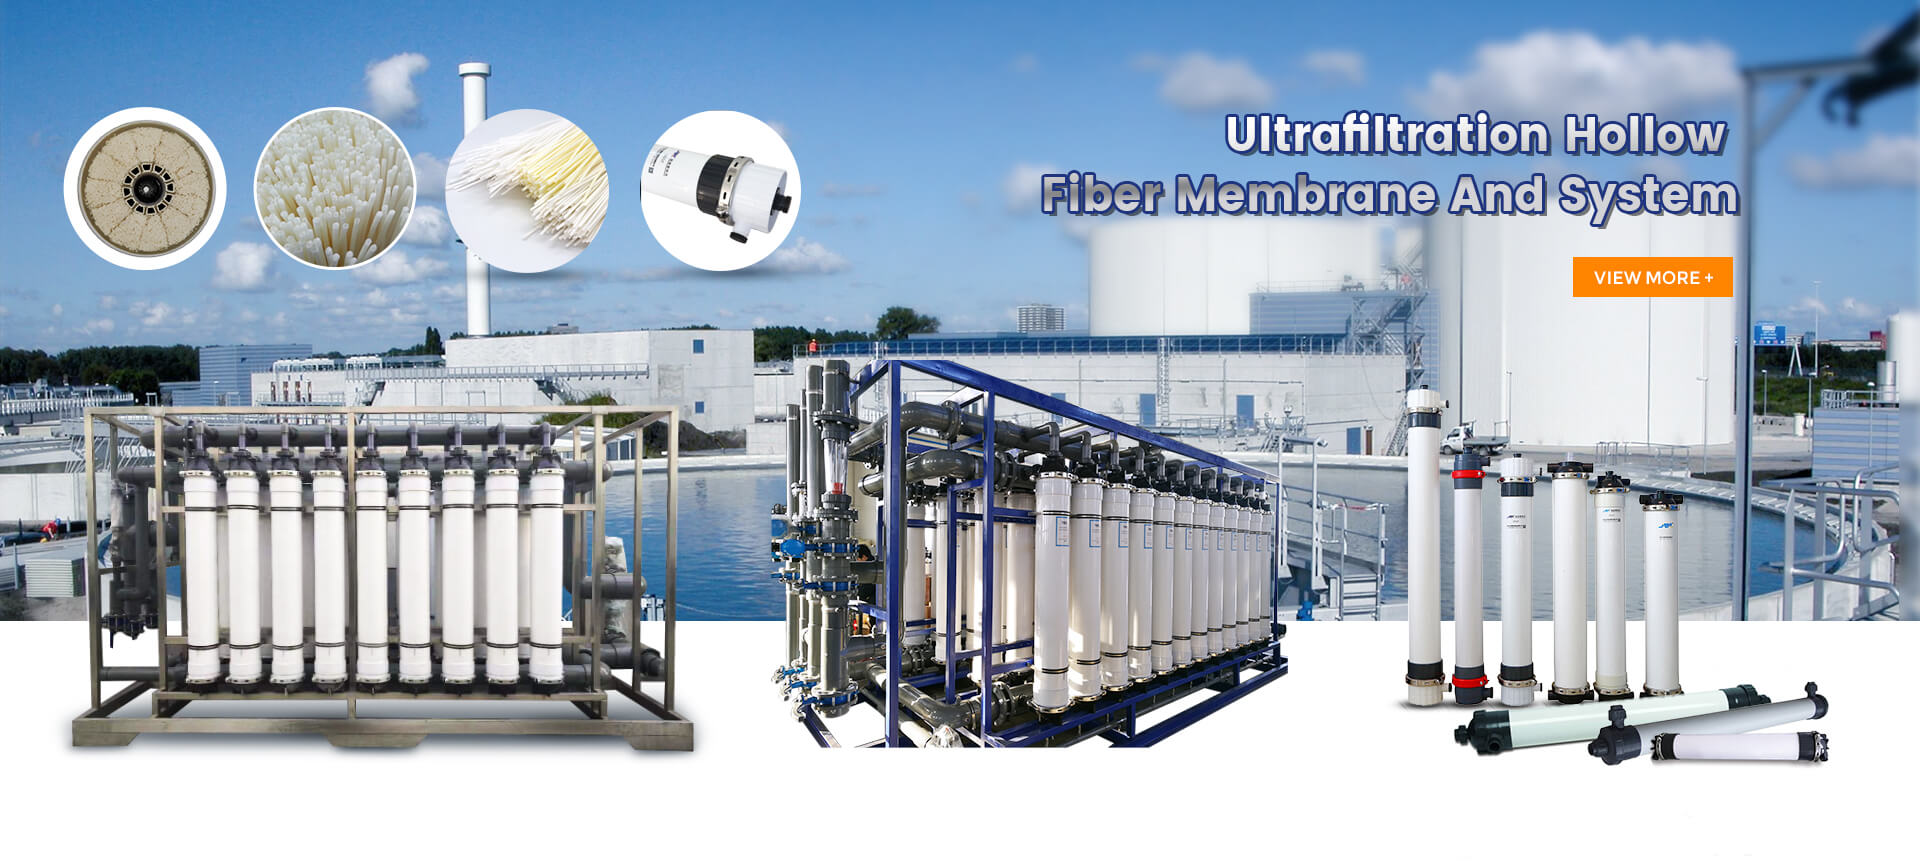 Ultrafiltration Hollow Fiber Membrane And System